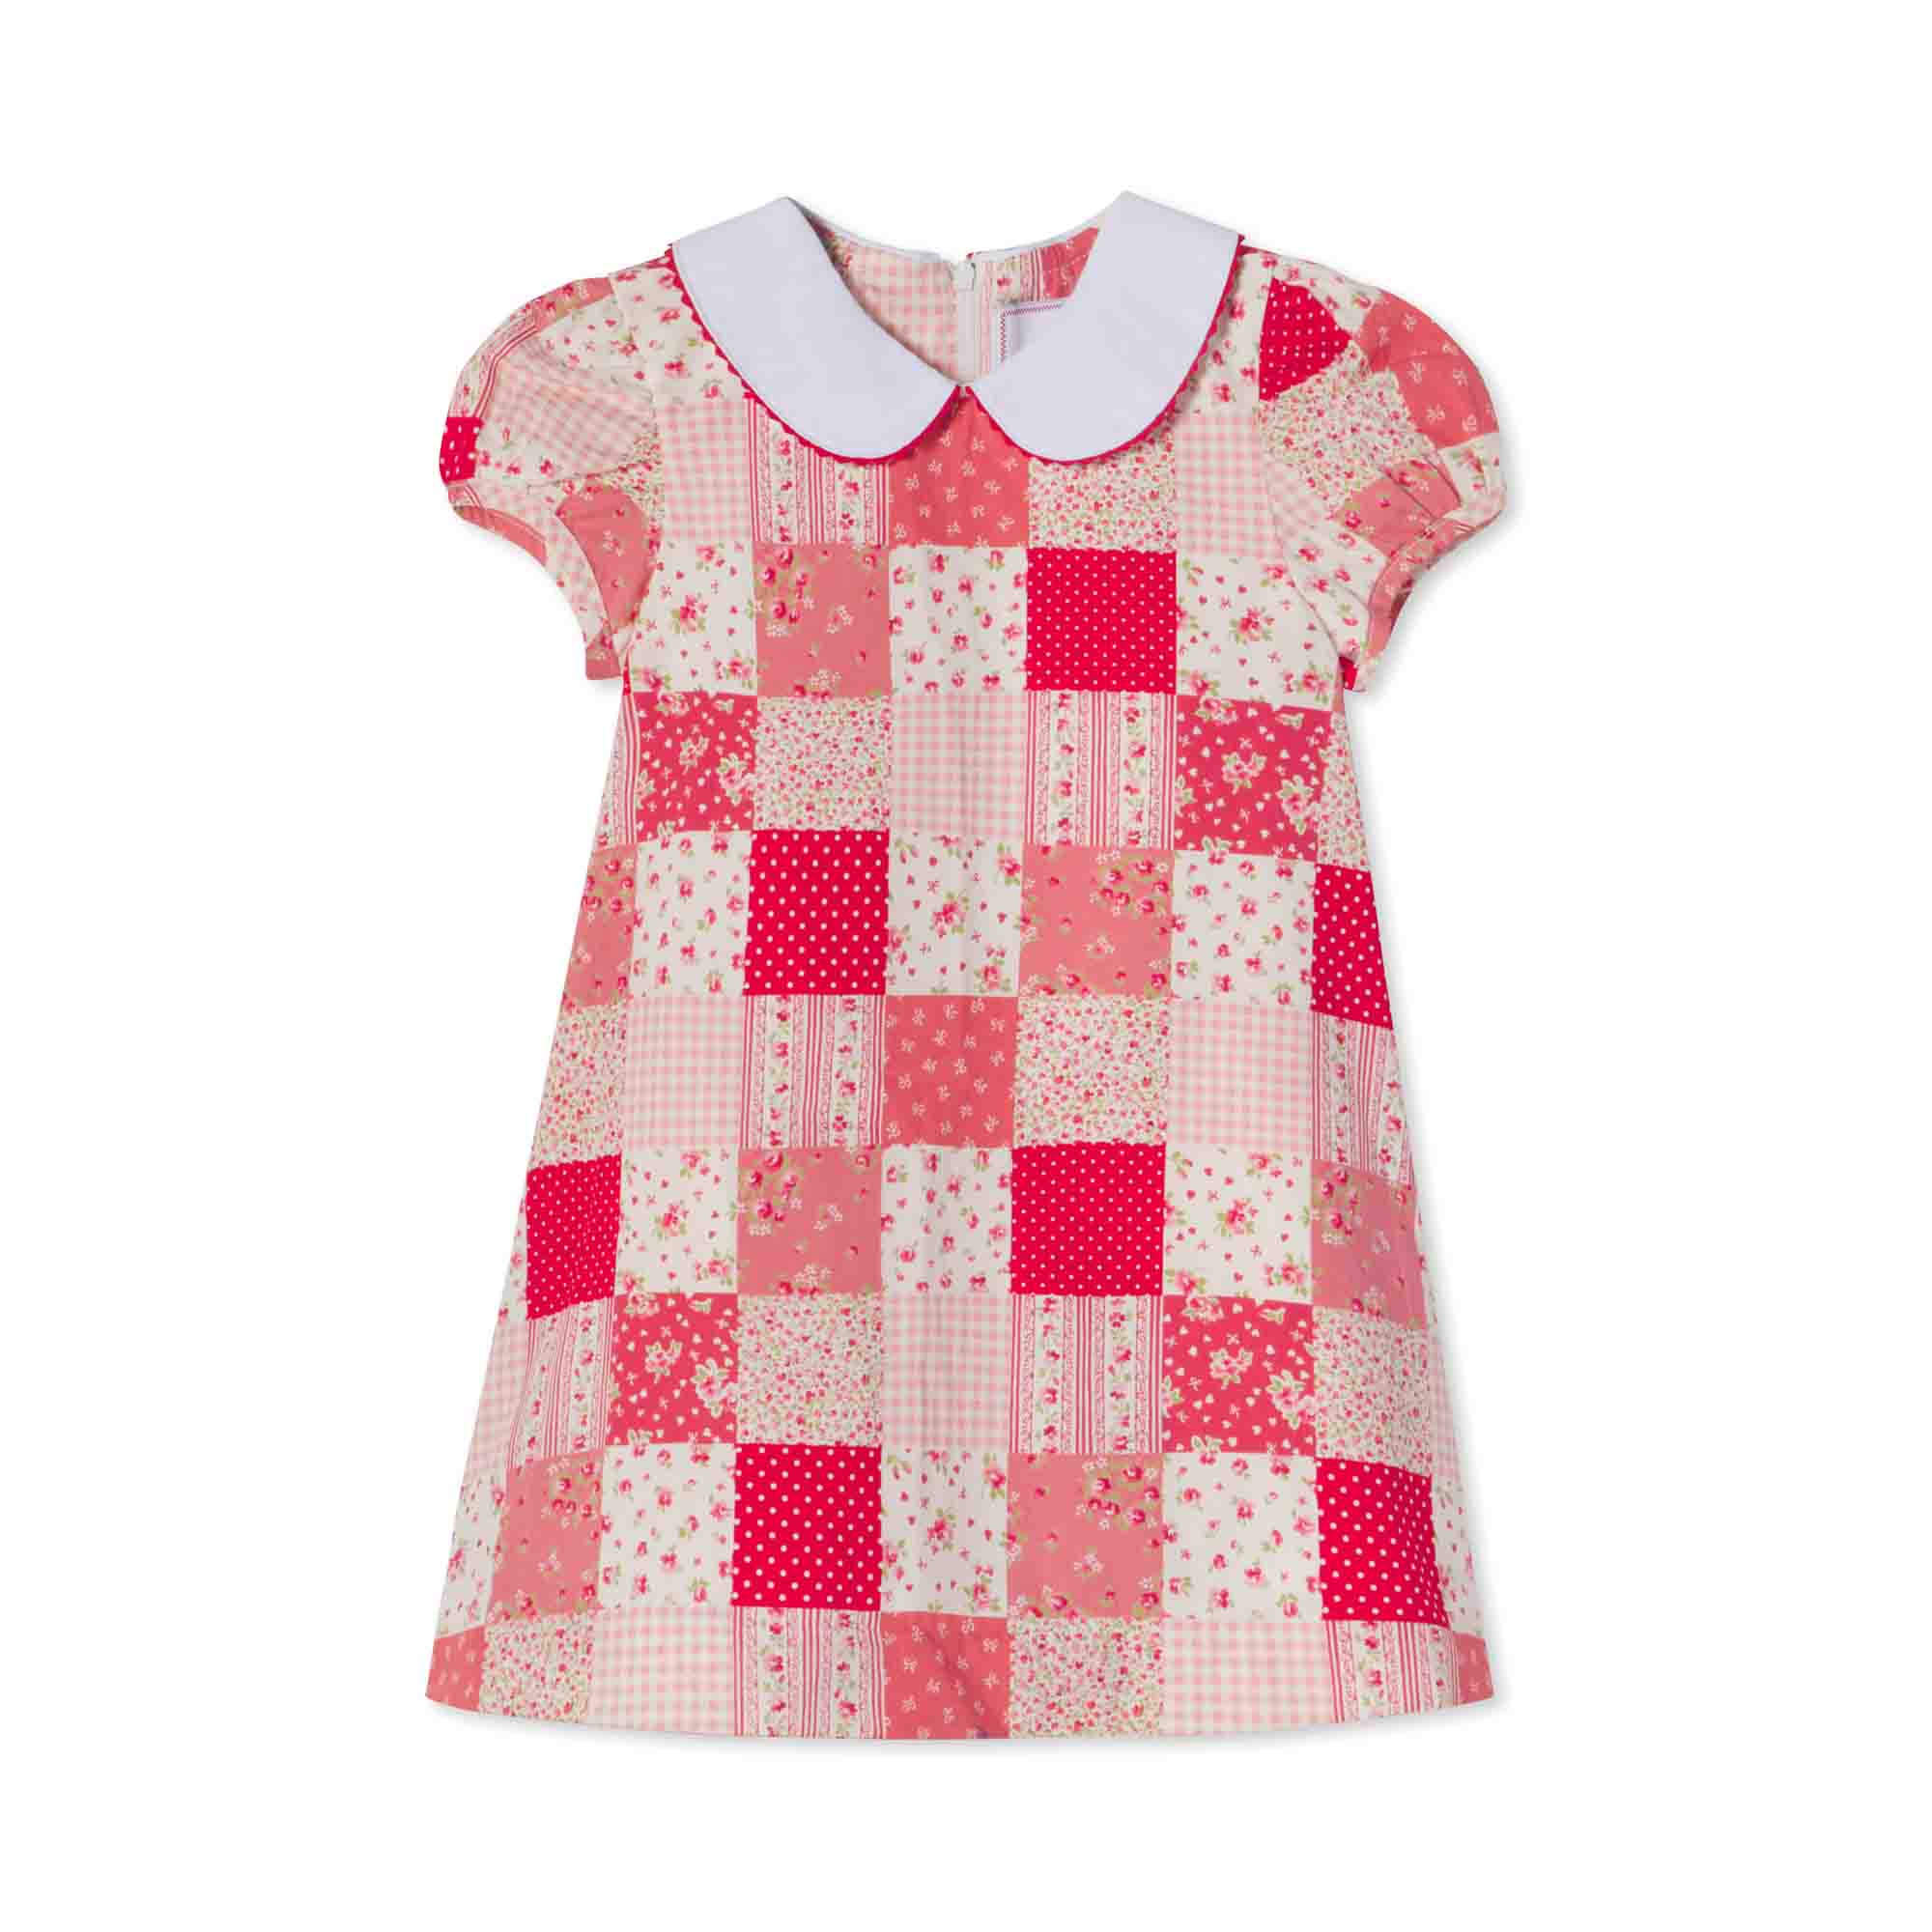 Classic and Preppy Paige Dress, Love Patchwork Crimson-Dresses, Jumpsuits and Rompers-Love Patchwork Crimson-6-9M-CPC - Classic Prep Childrenswear